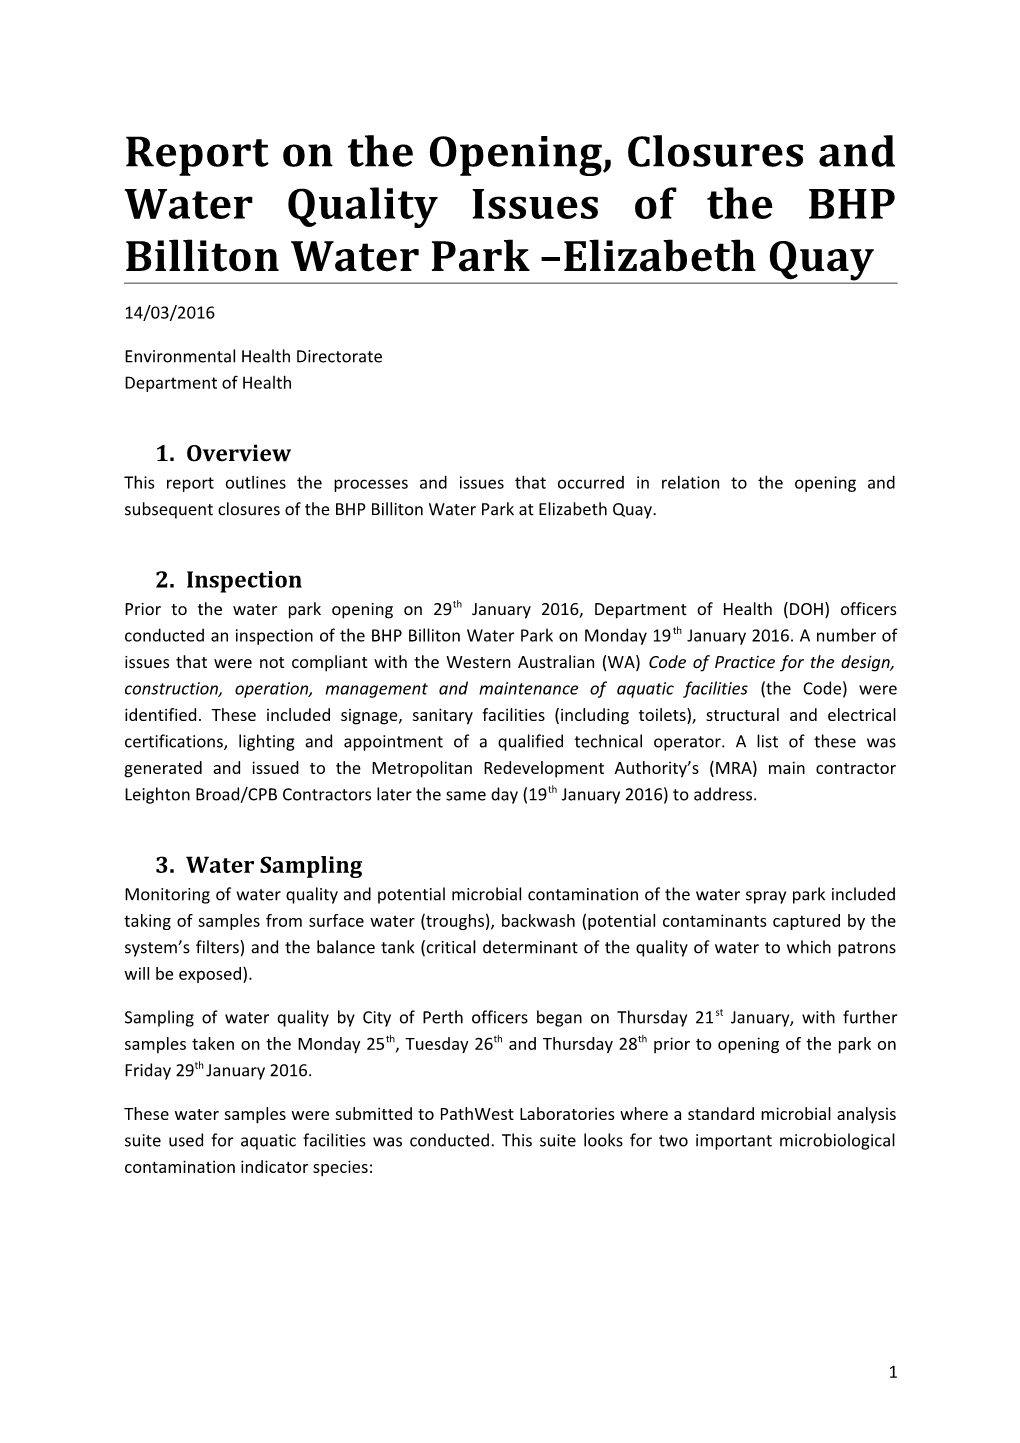 Report on the Opening, Closures and Water Quality Issues of the BHP Billiton Water Park